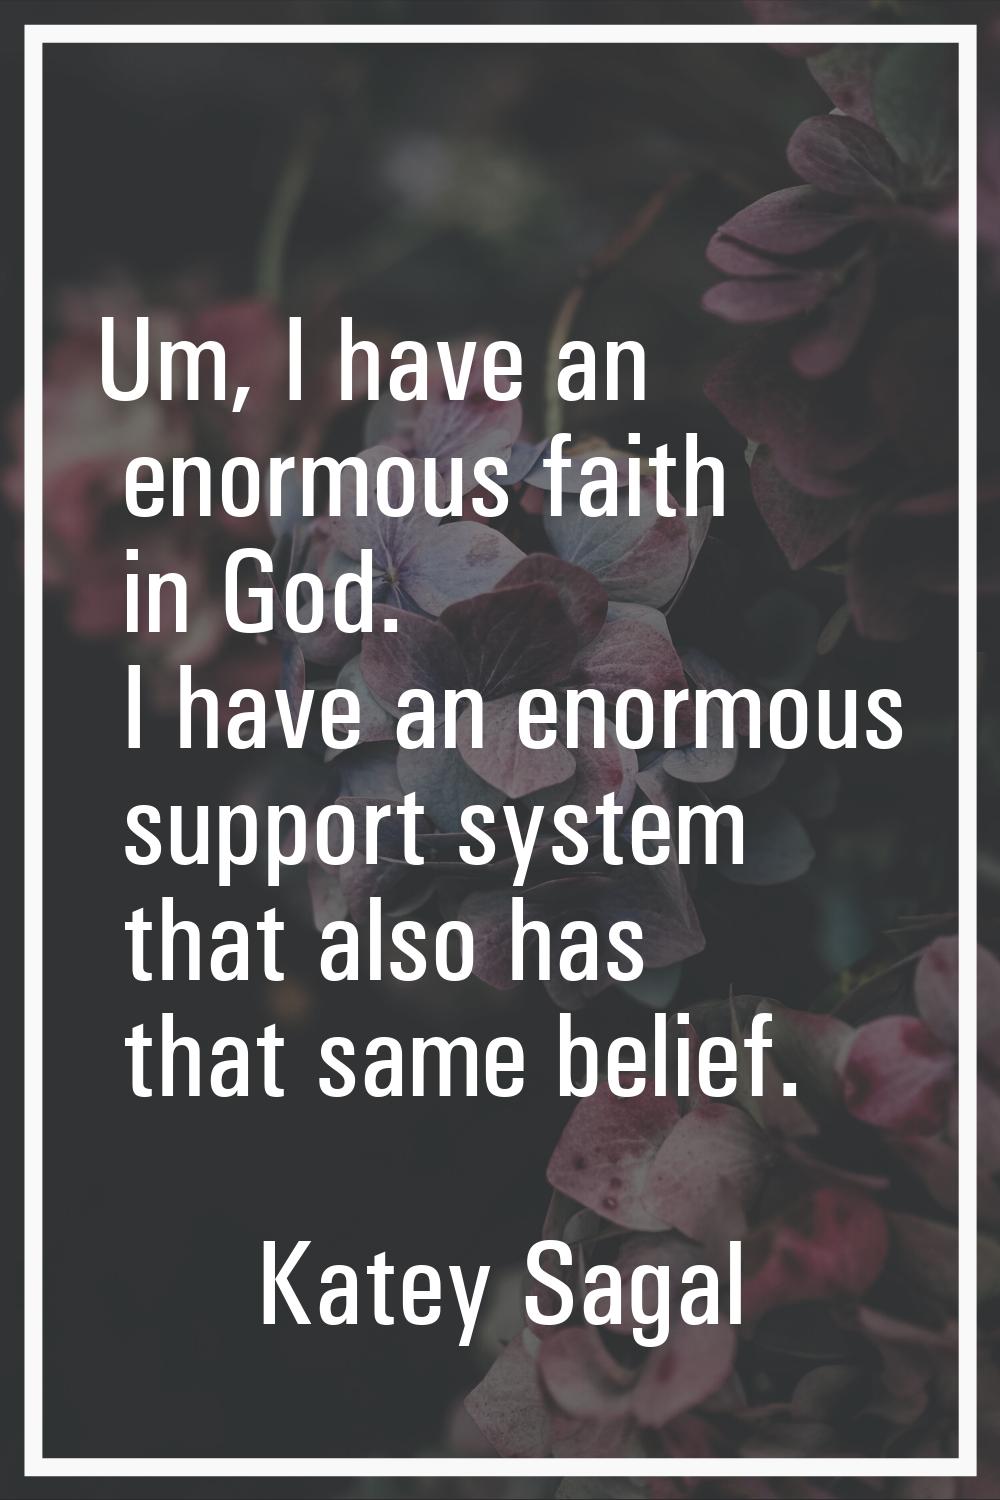 Um, I have an enormous faith in God. I have an enormous support system that also has that same beli